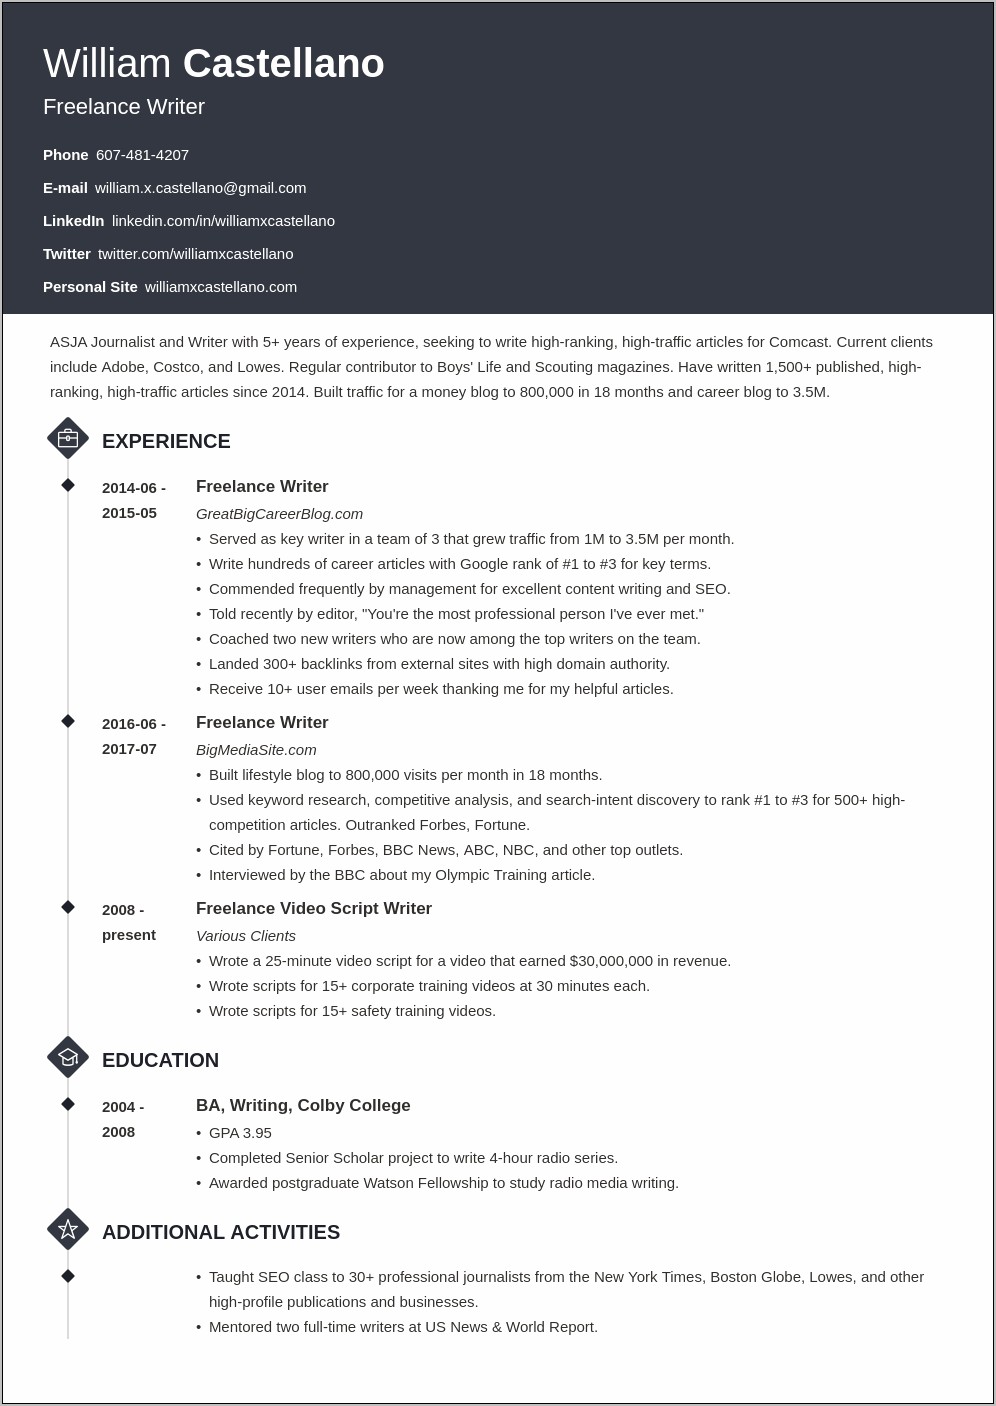 Hot To Include Freelance Work On A Resume